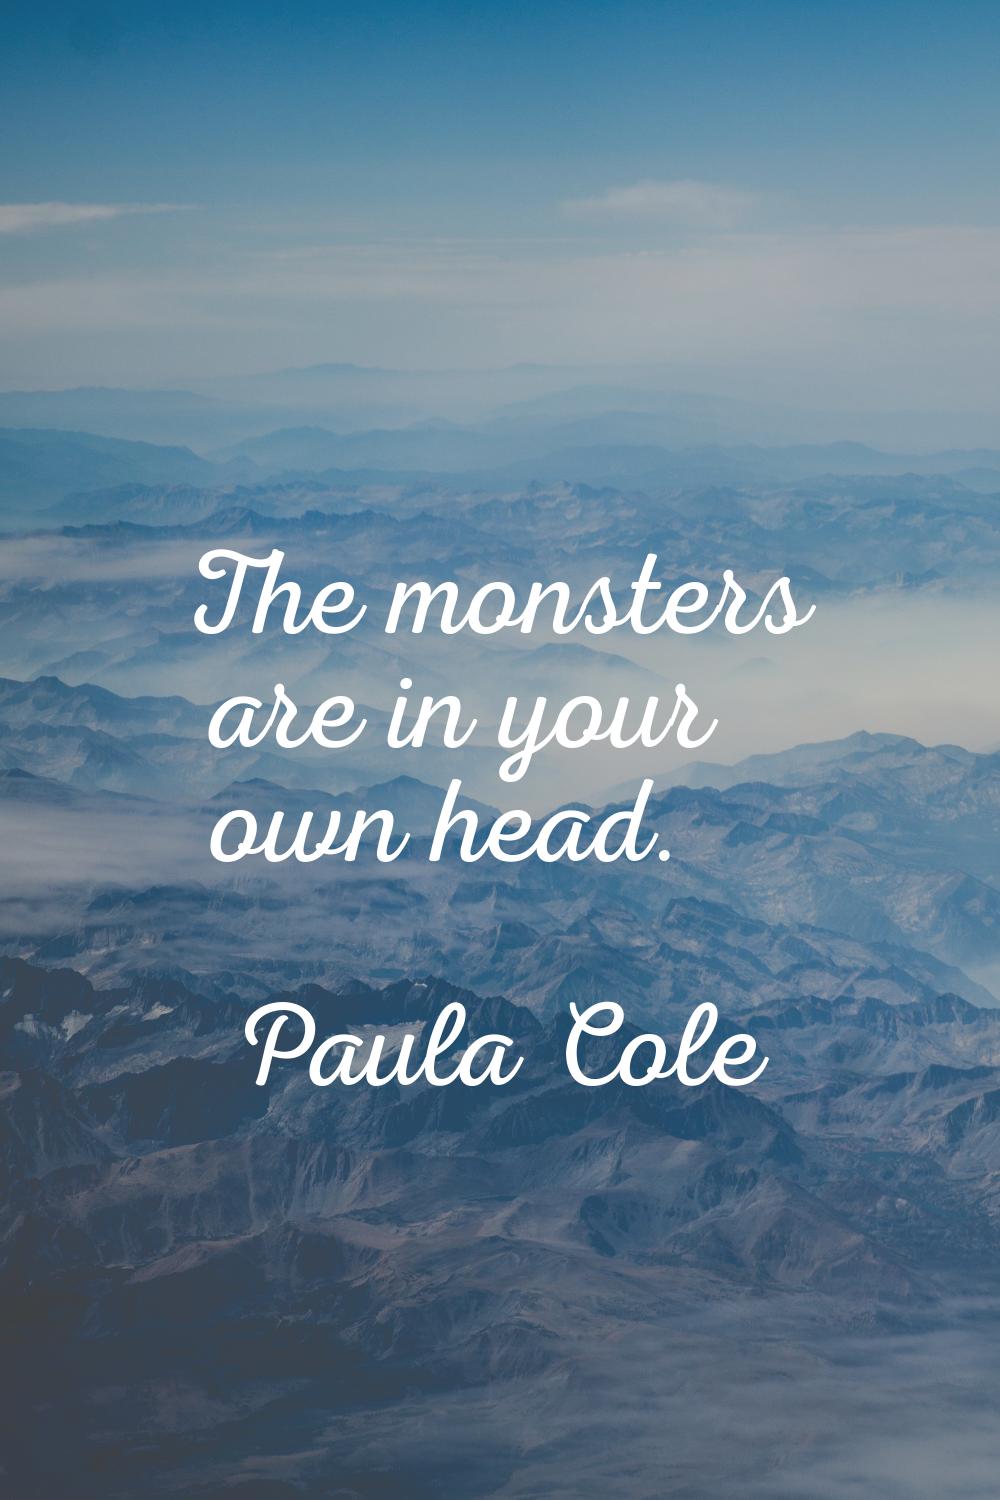 The monsters are in your own head.